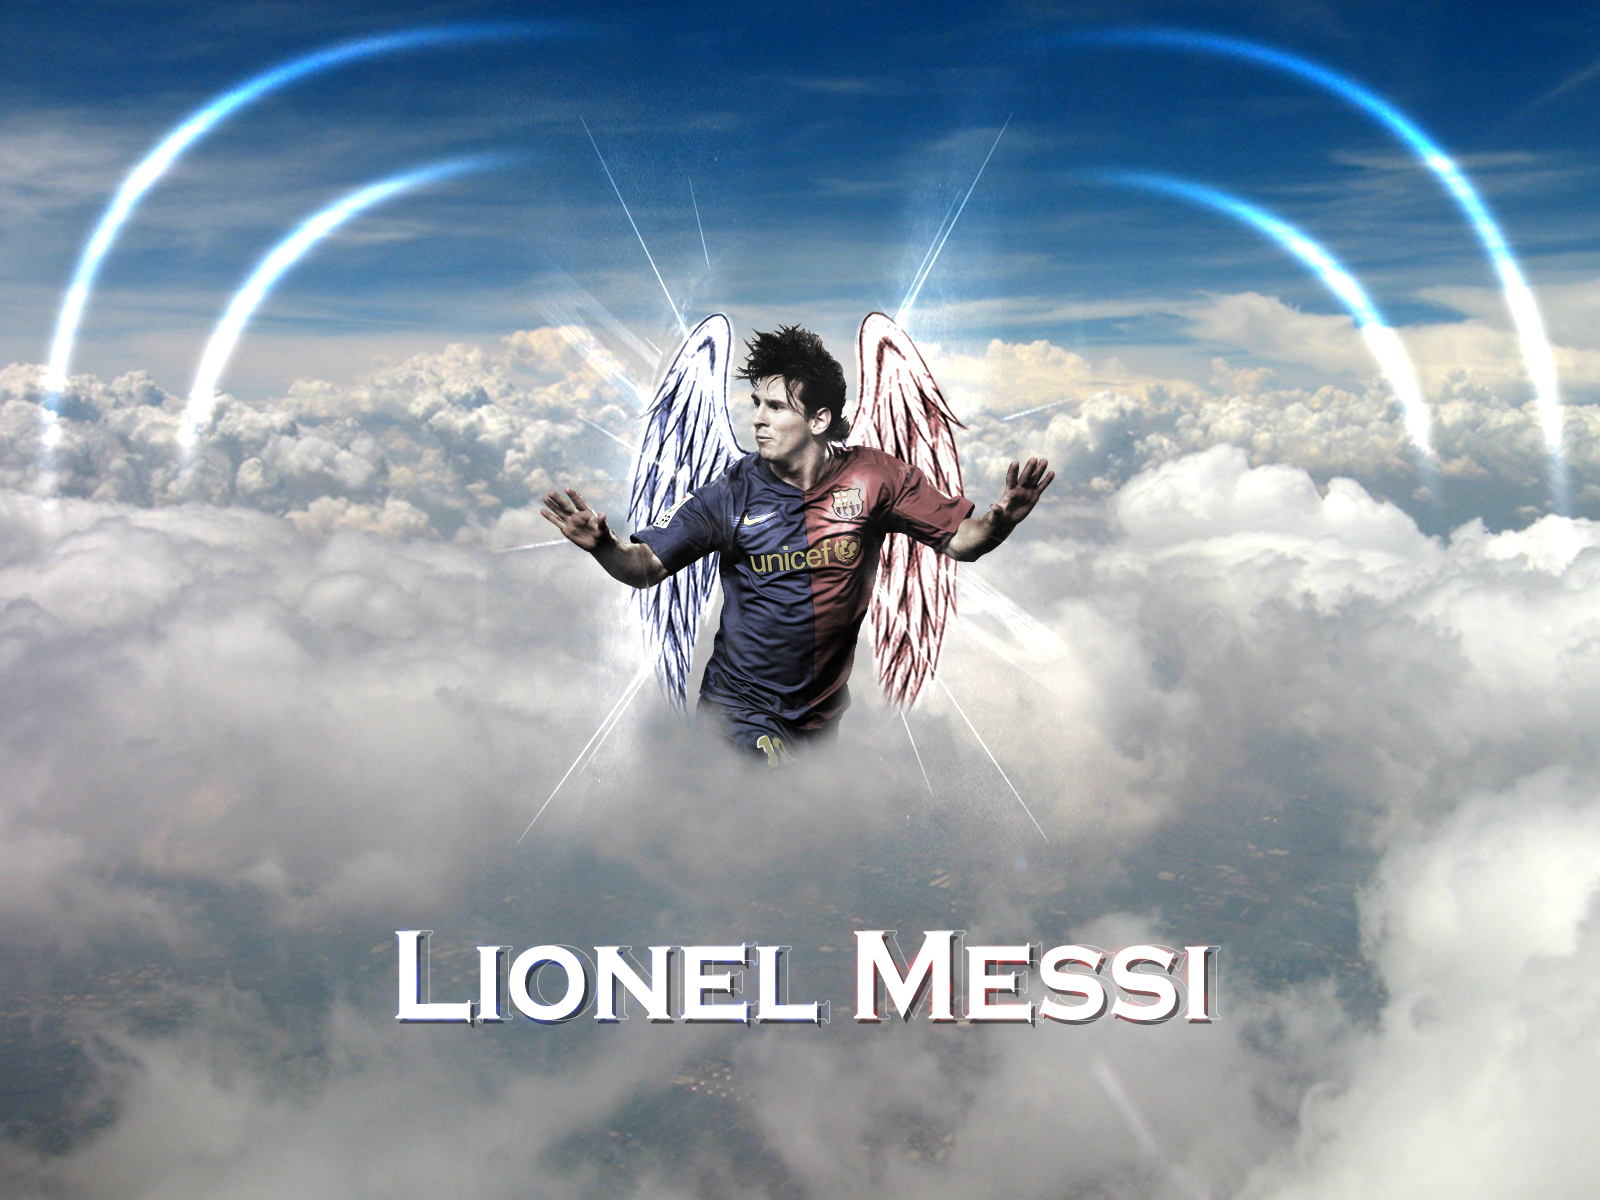  lionel messi. lionel messi wallpapers 